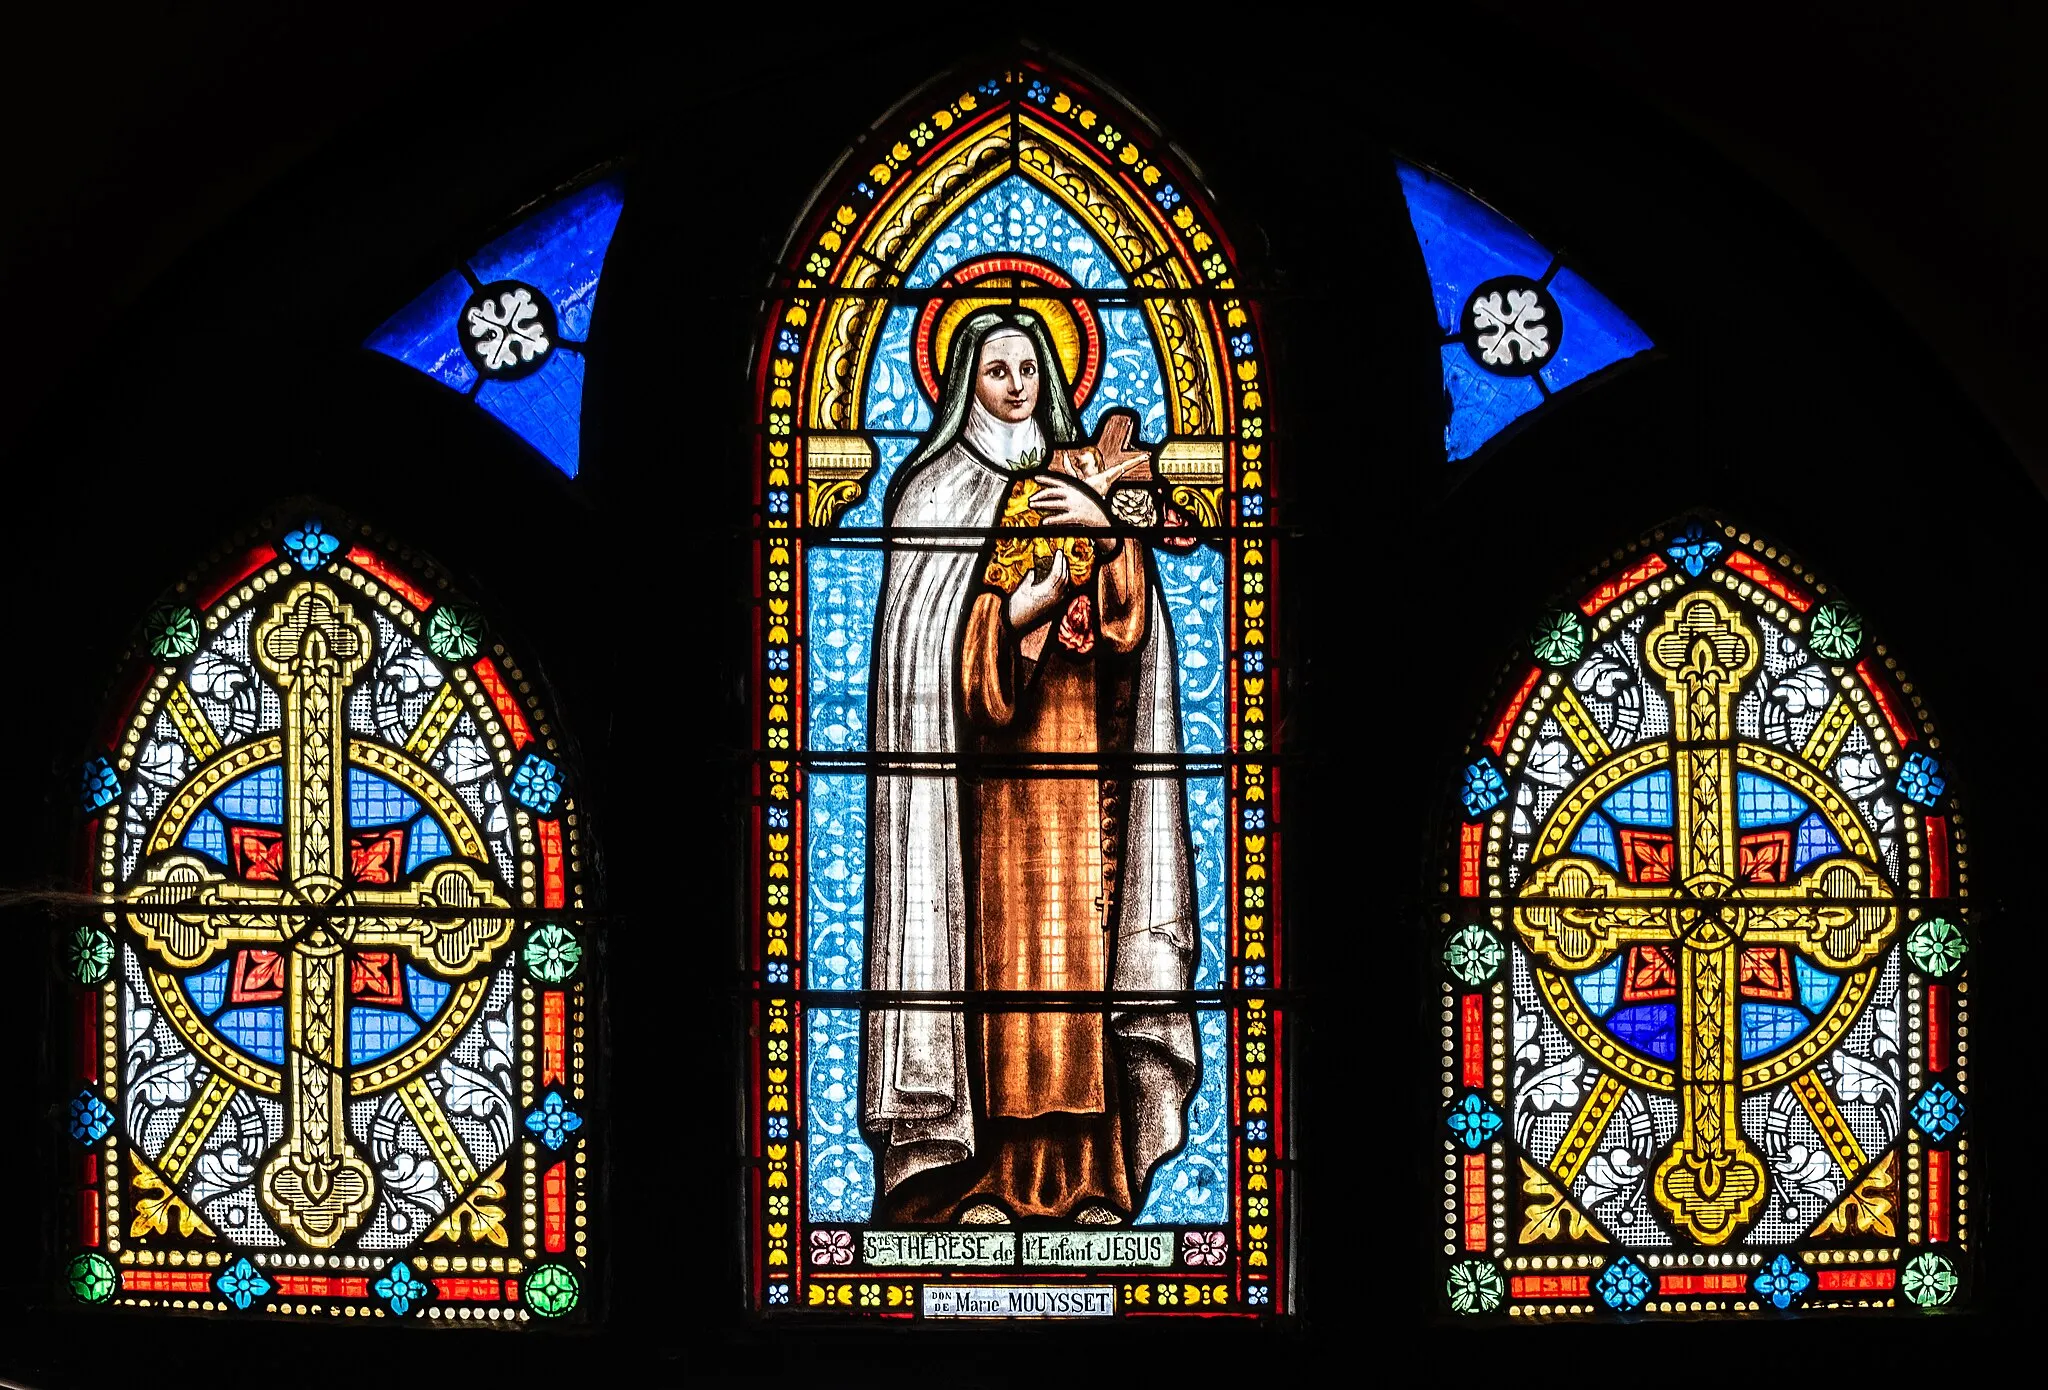 Photo showing: Stained-glass windows in the Saint Hilarius church in Saint-Hilaire, commune of Trémouilles, Aveyron, France